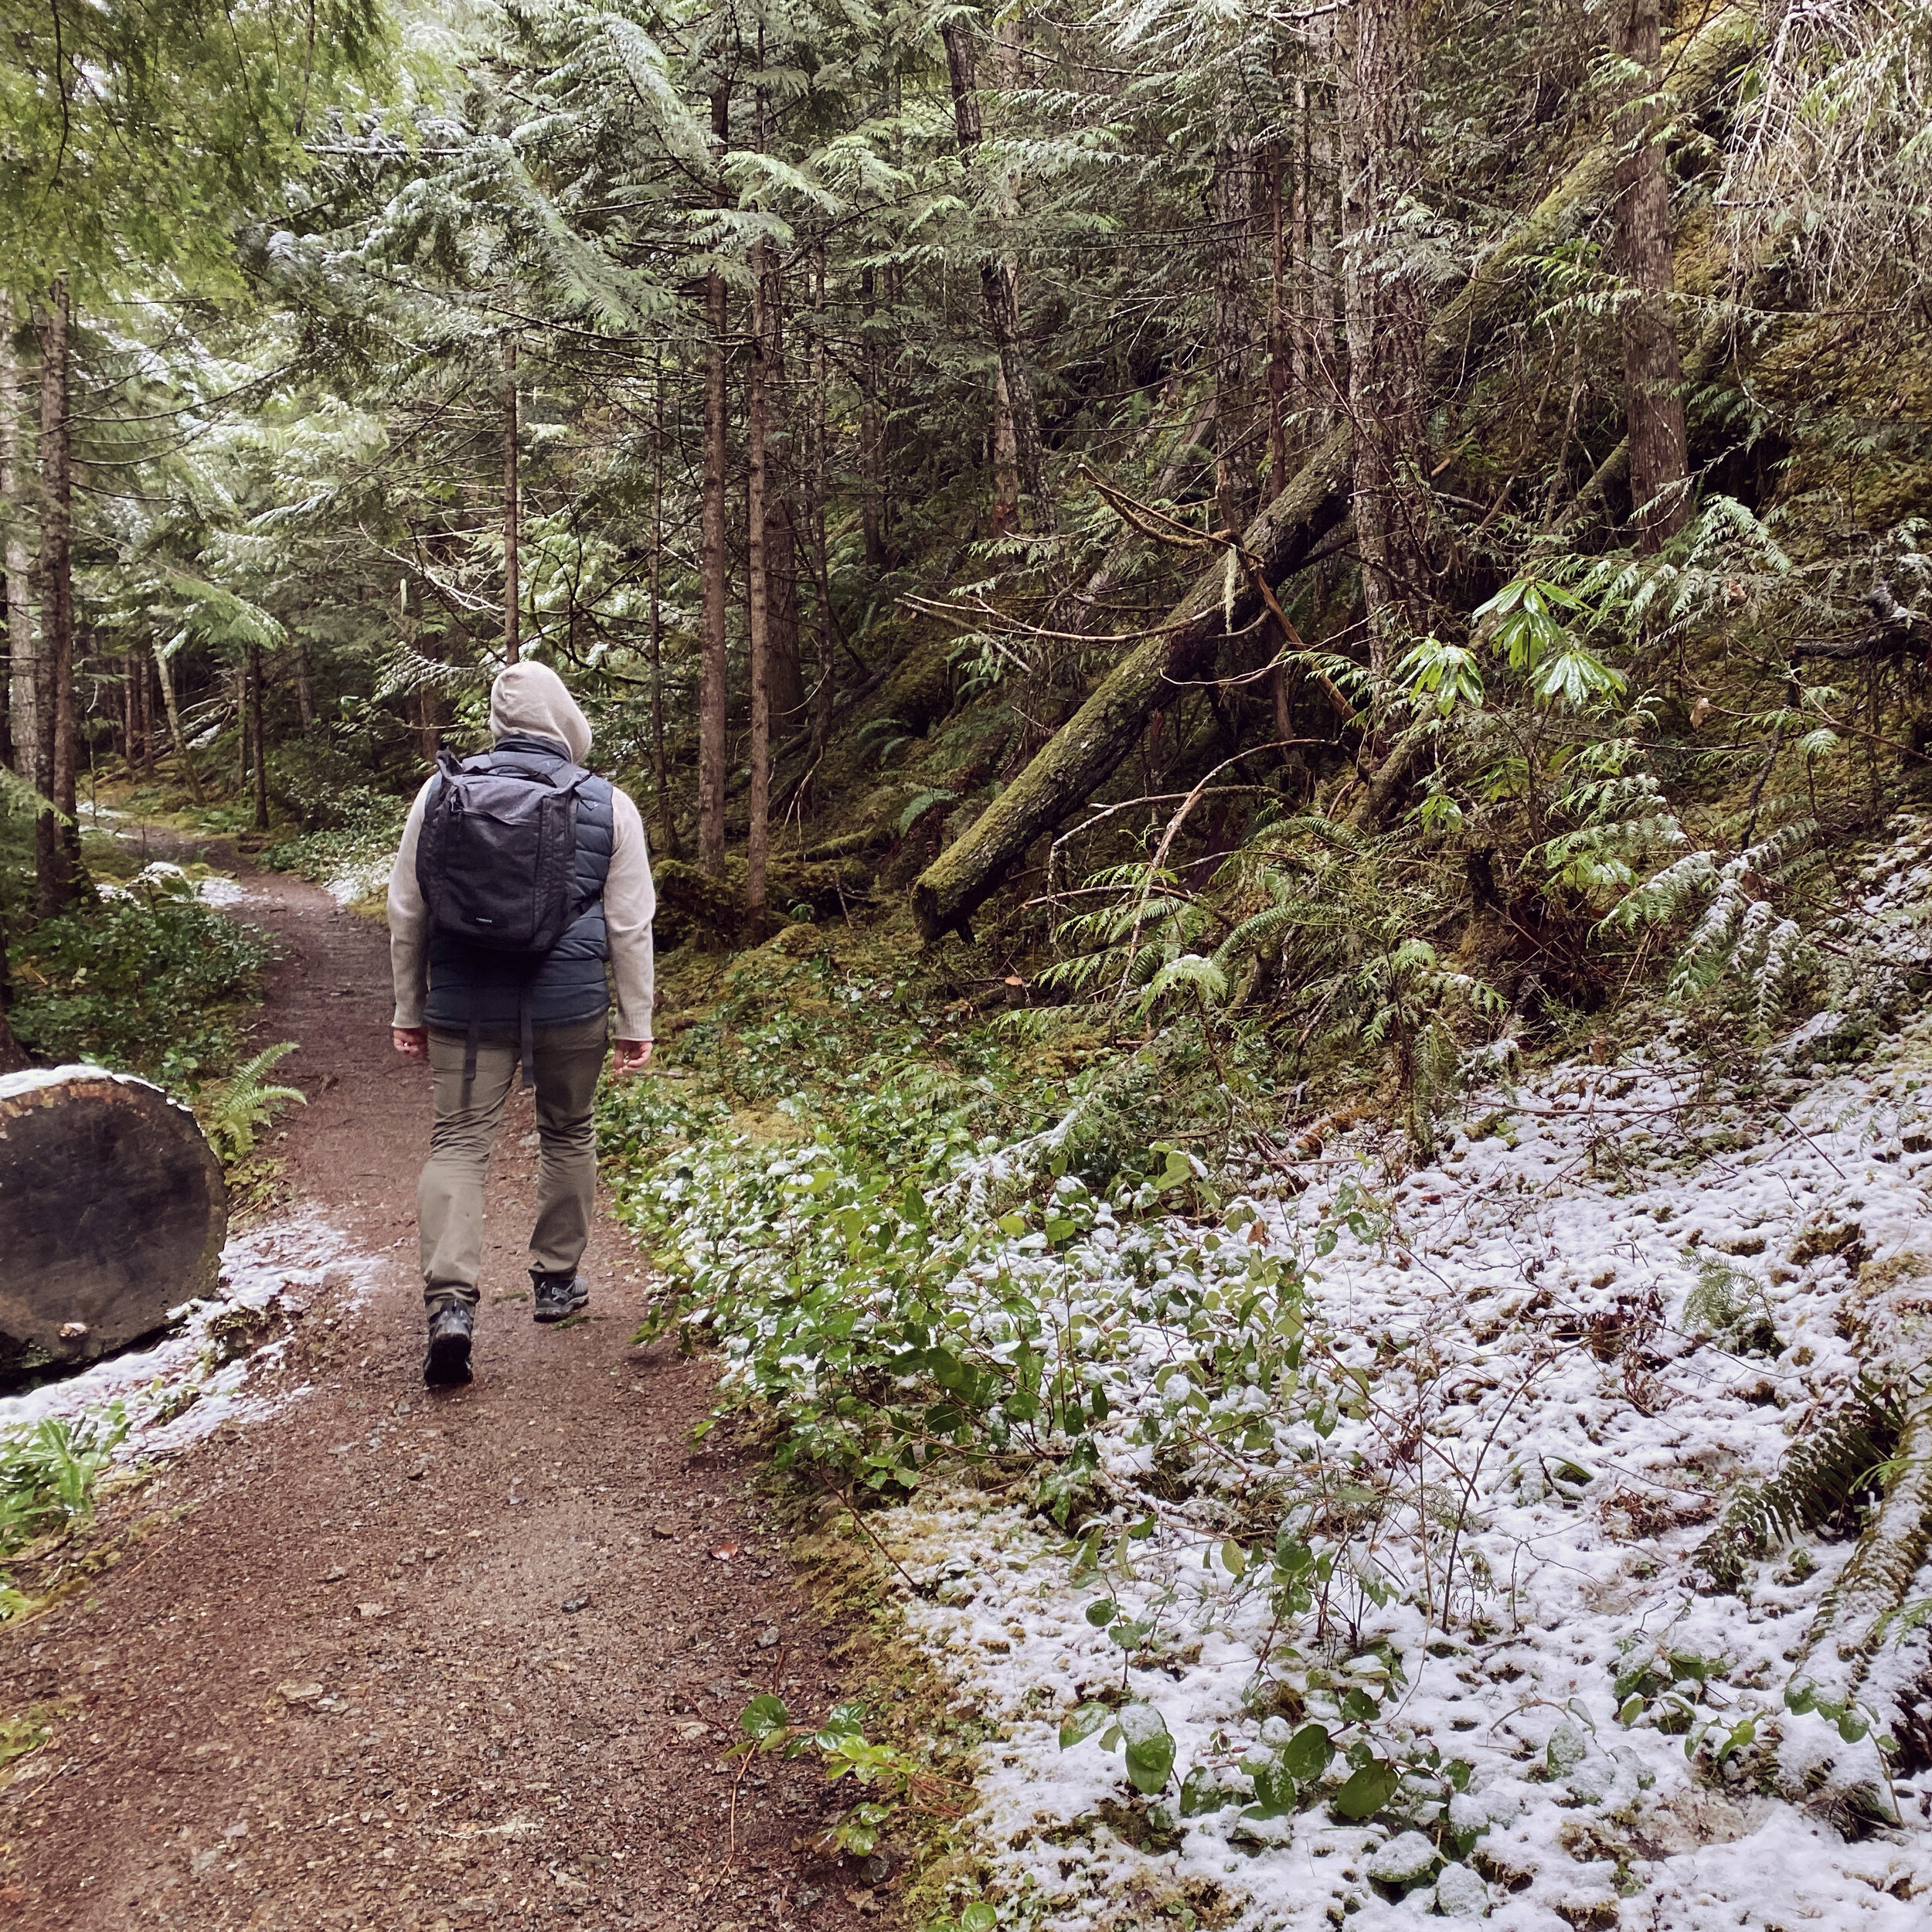 Snowy Hike on the lower Quilcene trail in Washington state (Copy)